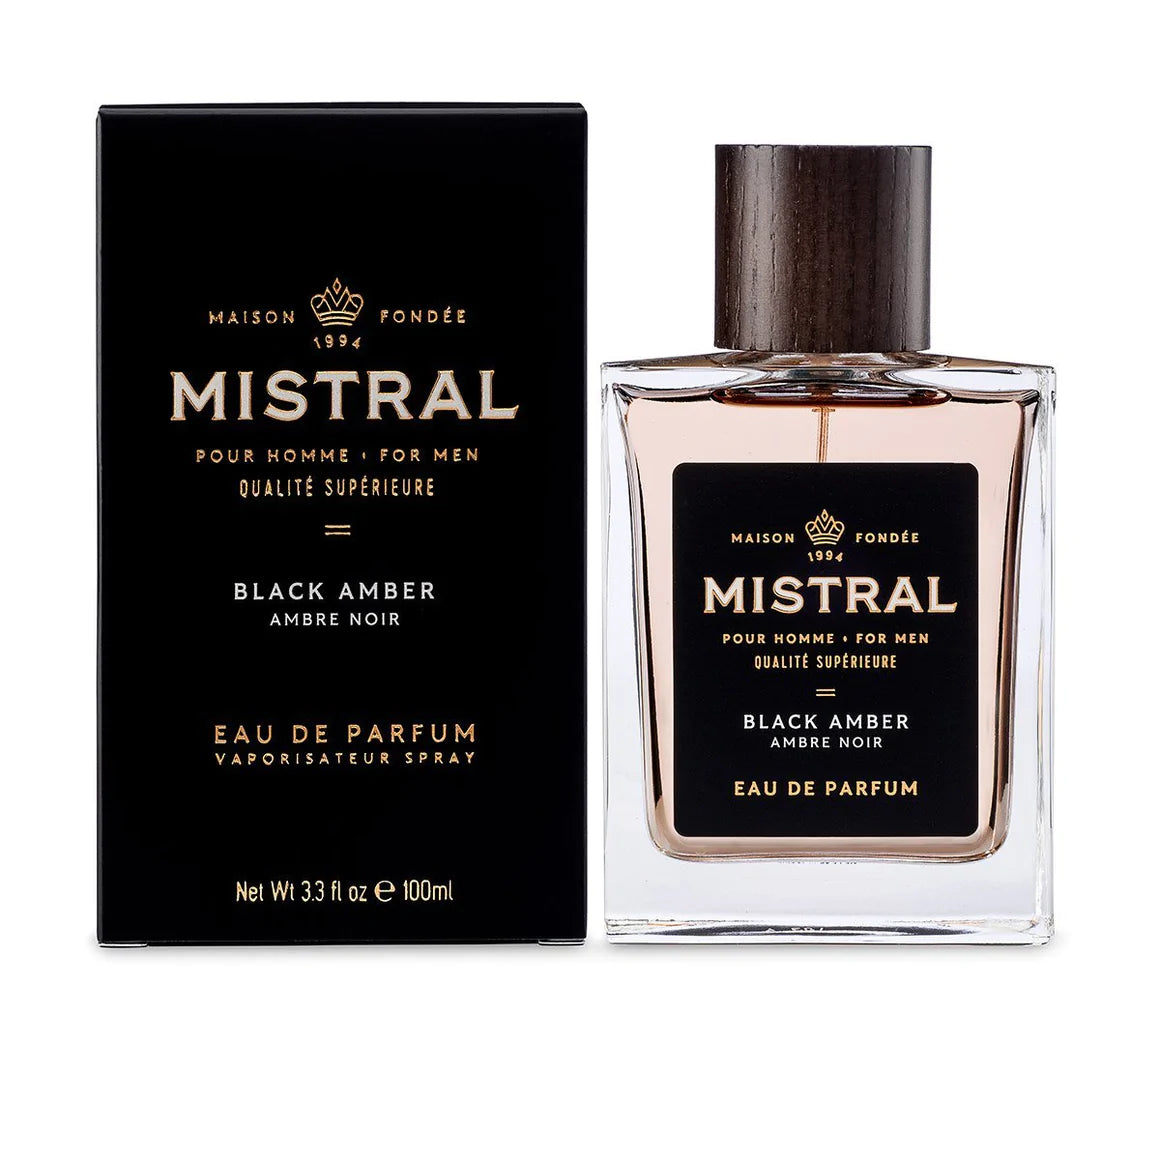 Mistral - Cologne - 100ml-Men's Accessories-Black Amber-Yaletown-Vancouver-Surrey-Canada